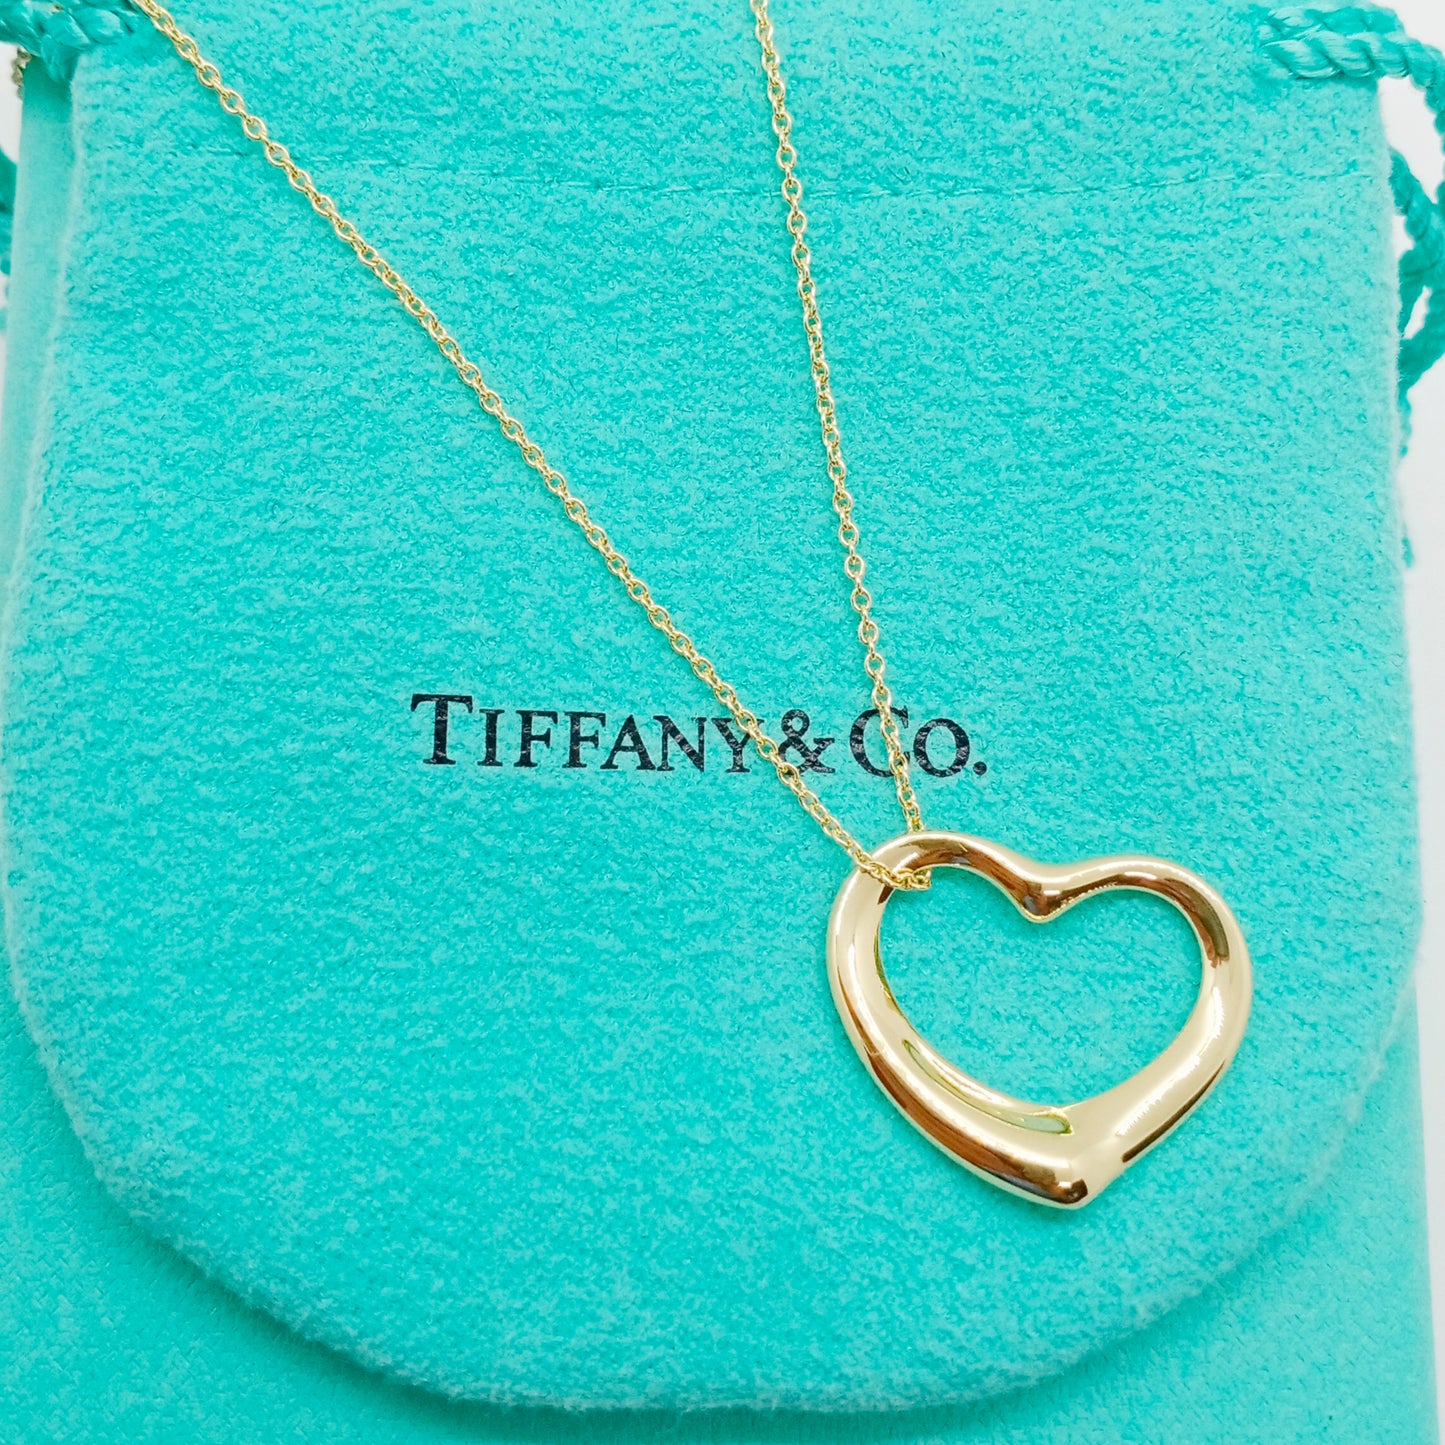 Tiffany&Co Open Heart Necklace Large